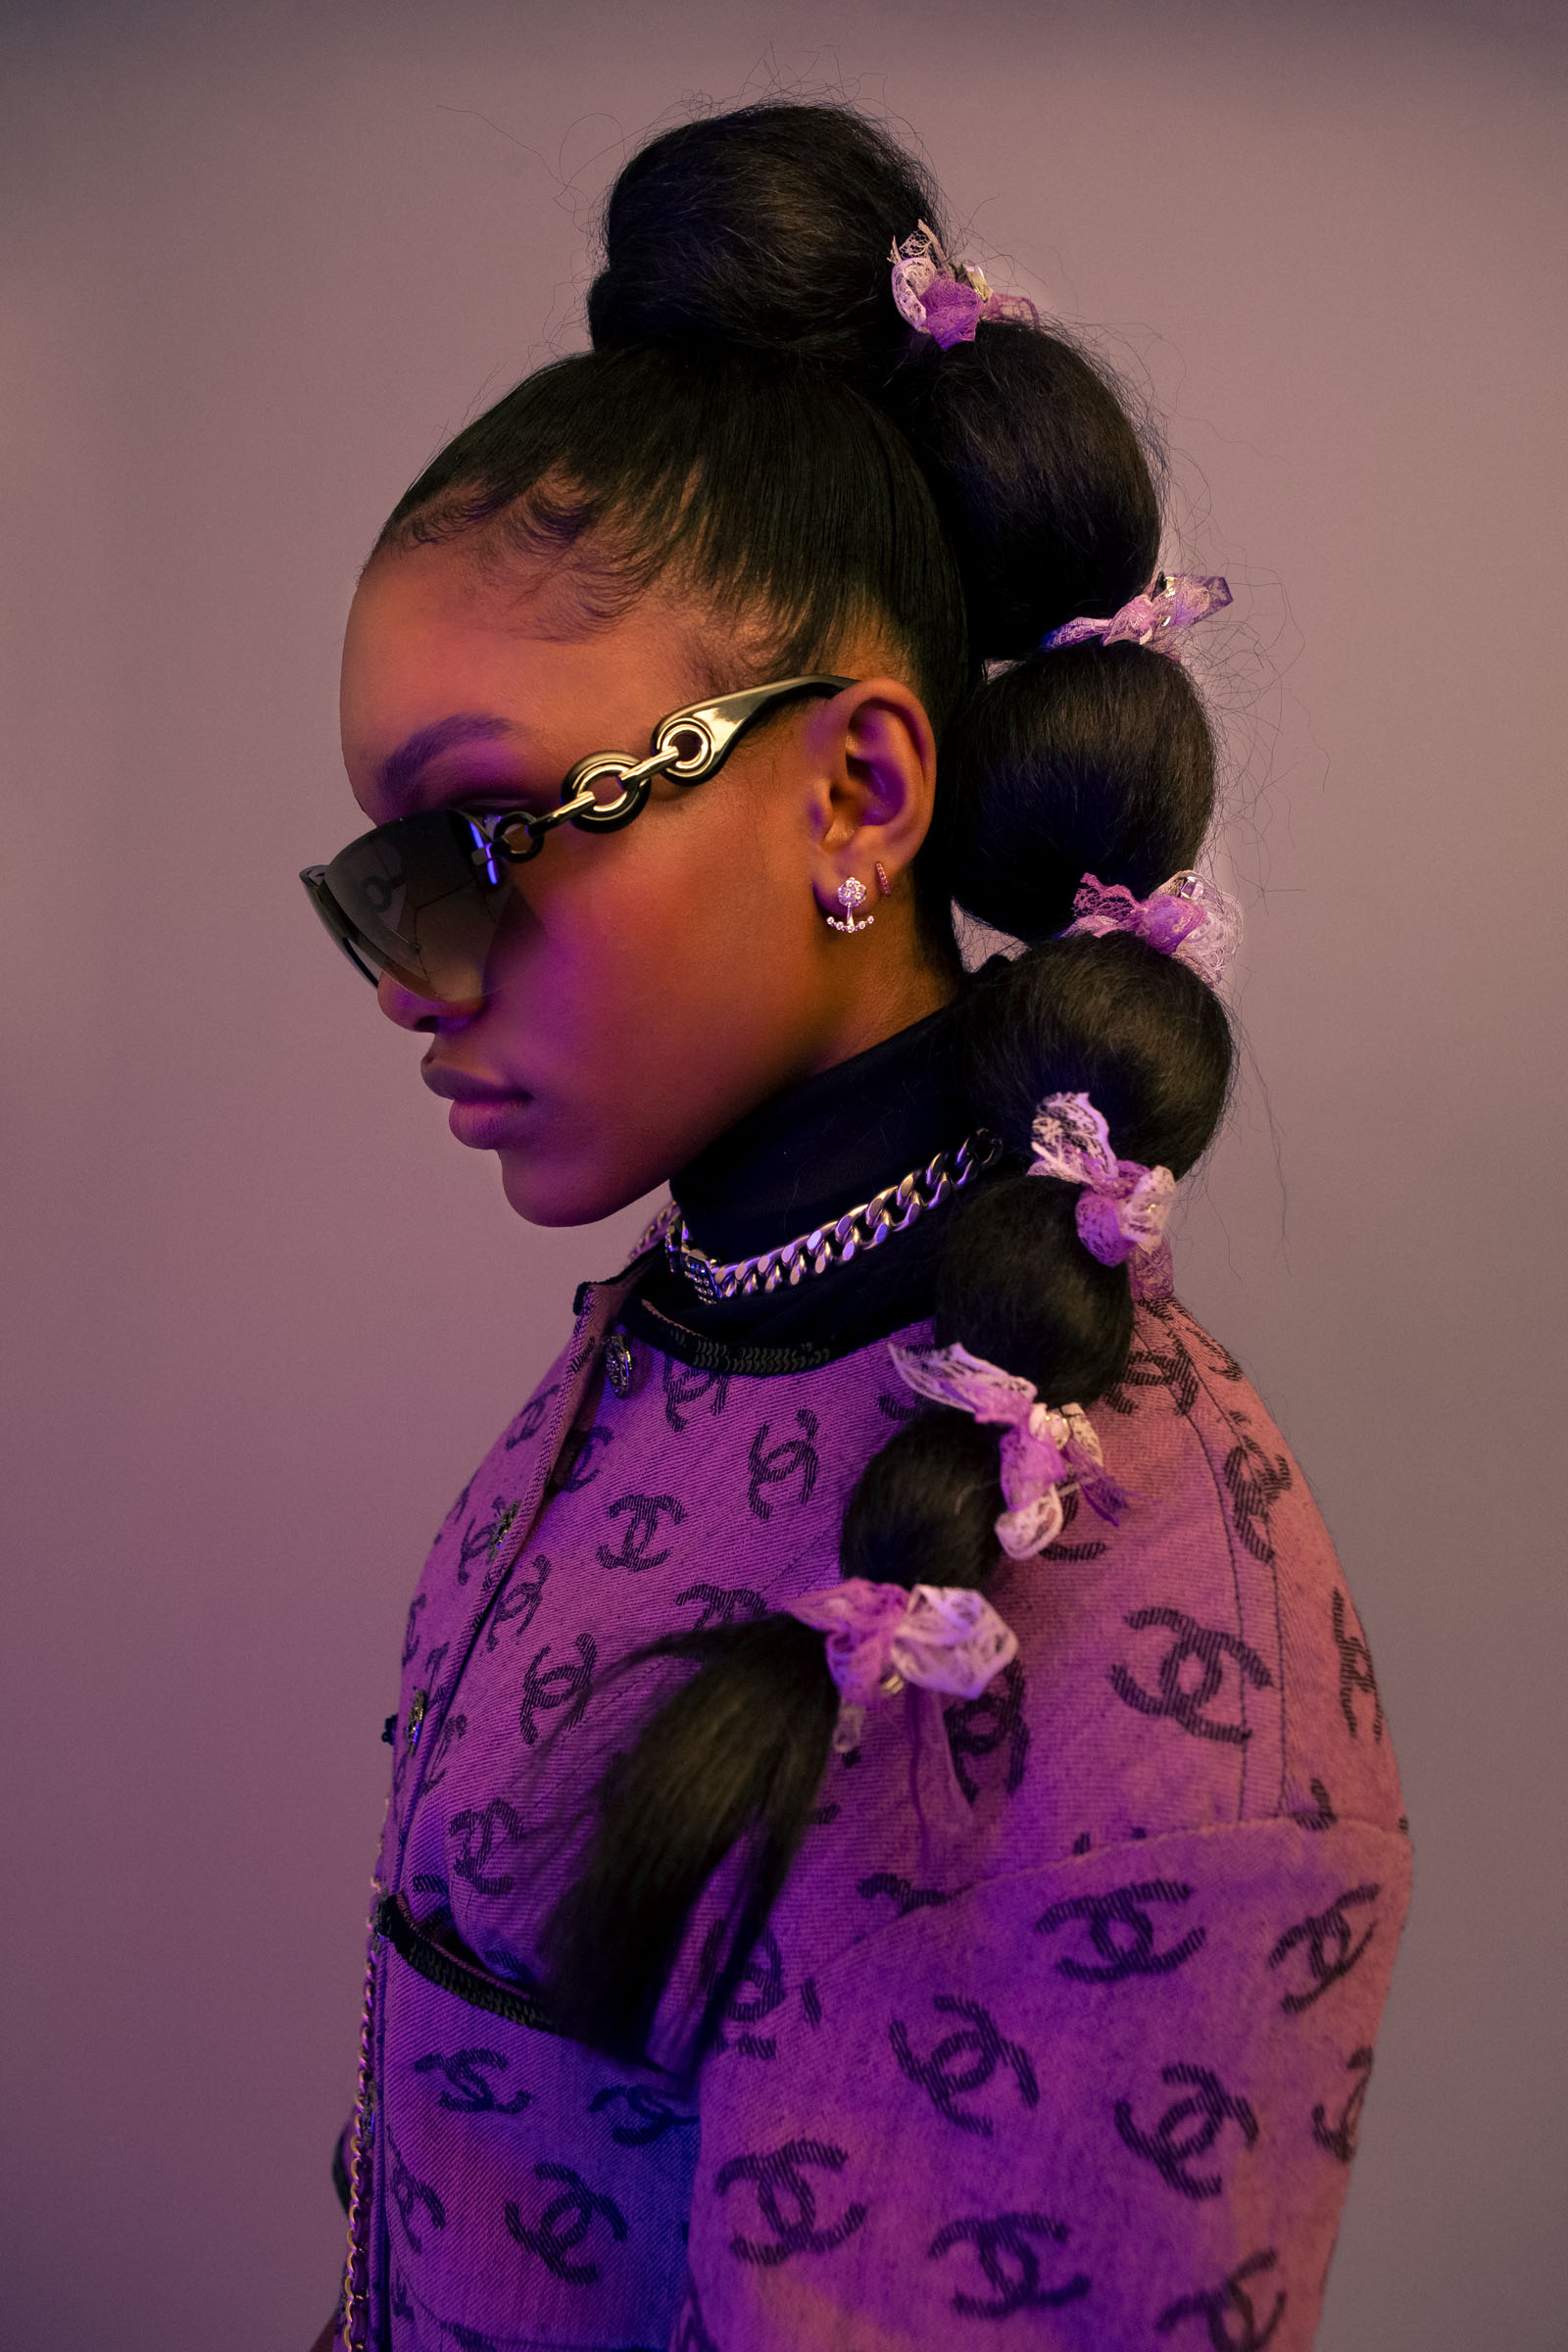 Turtleneck STYLIST’S OWN Dressand necklace CHANEL Sunglasses GIANT VINTAGE Left earring CARTIER Right earring DEMI’S OWN